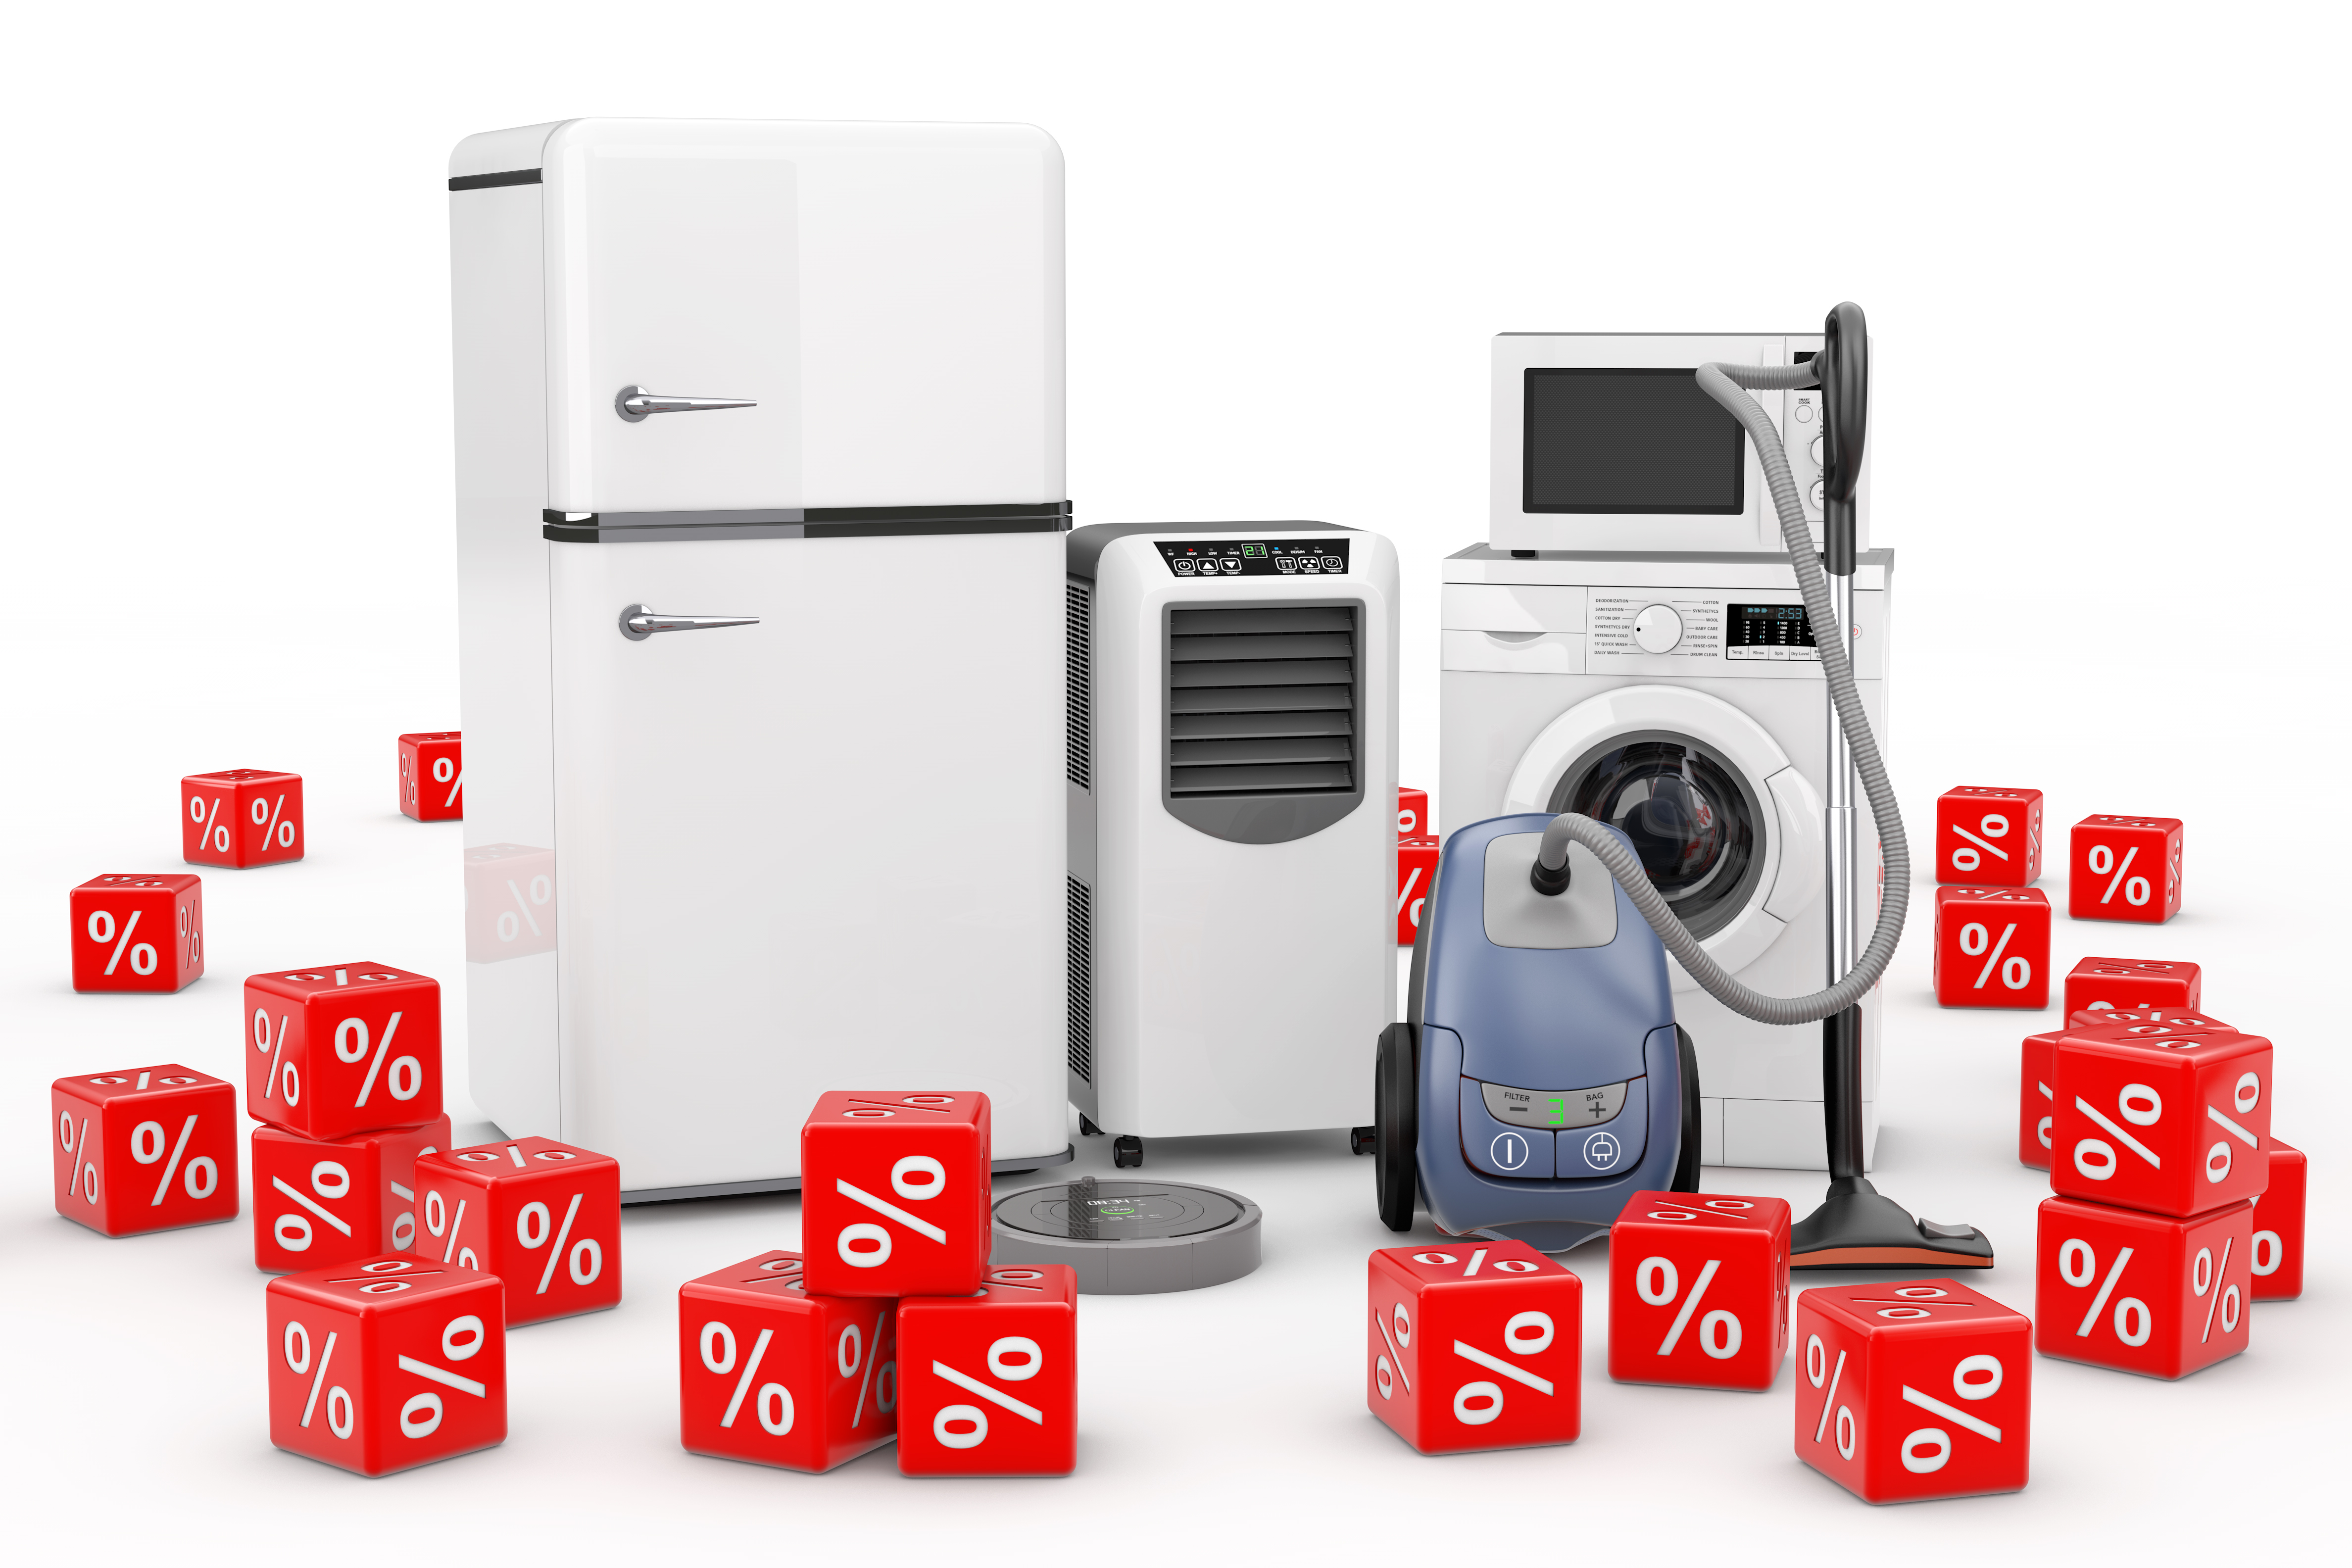 https://directclaimsolution.com/wp-content/uploads/2019/09/Household-Appliances-Set-with-Red-Discount-Percent-Cubes.-3d-Rendering-982755066_4752x3168.jpeg